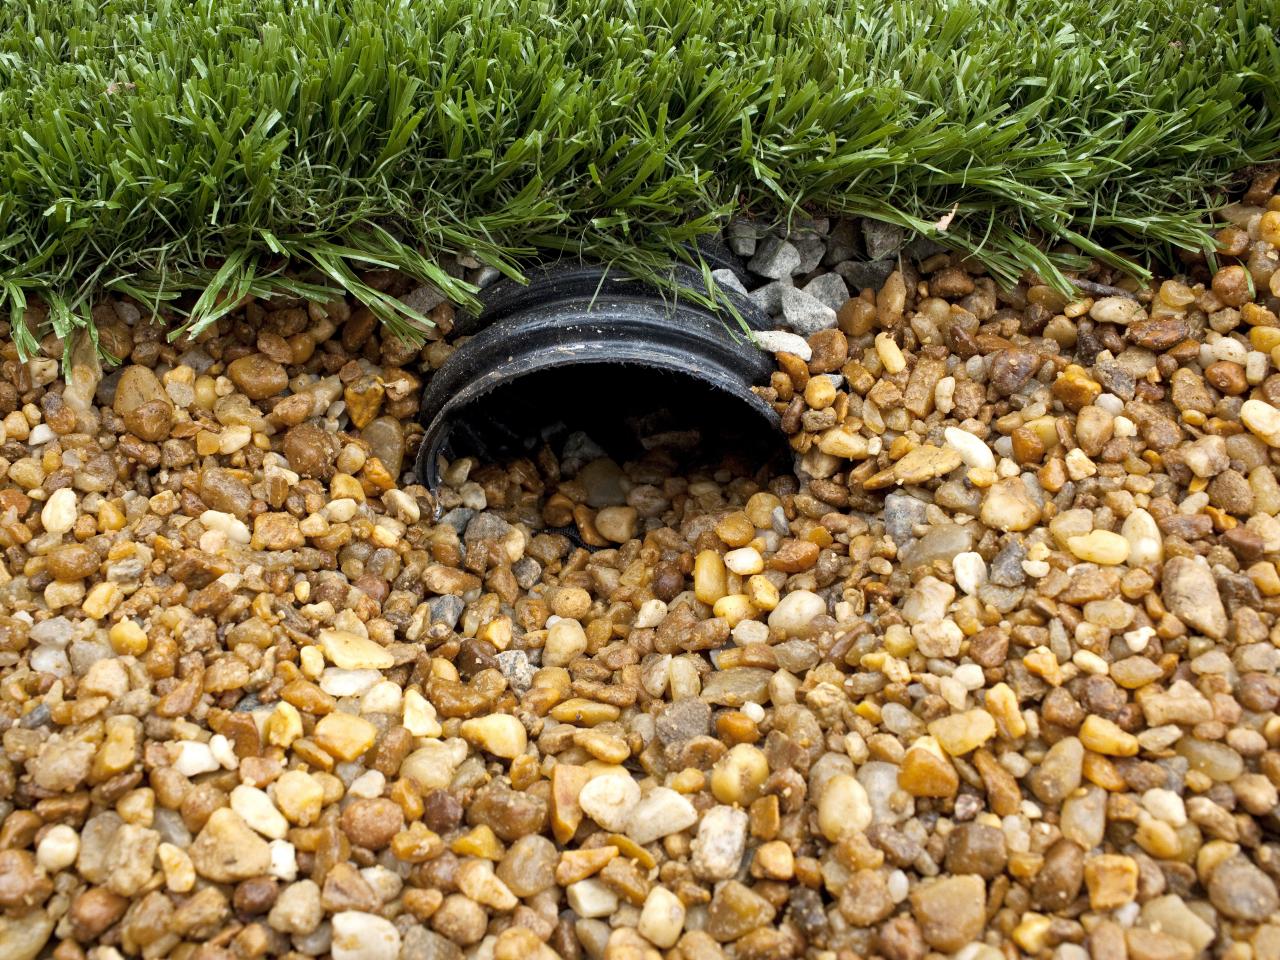 How To Improve Yard Drainage, Landscaping Ideas To Redirect Water